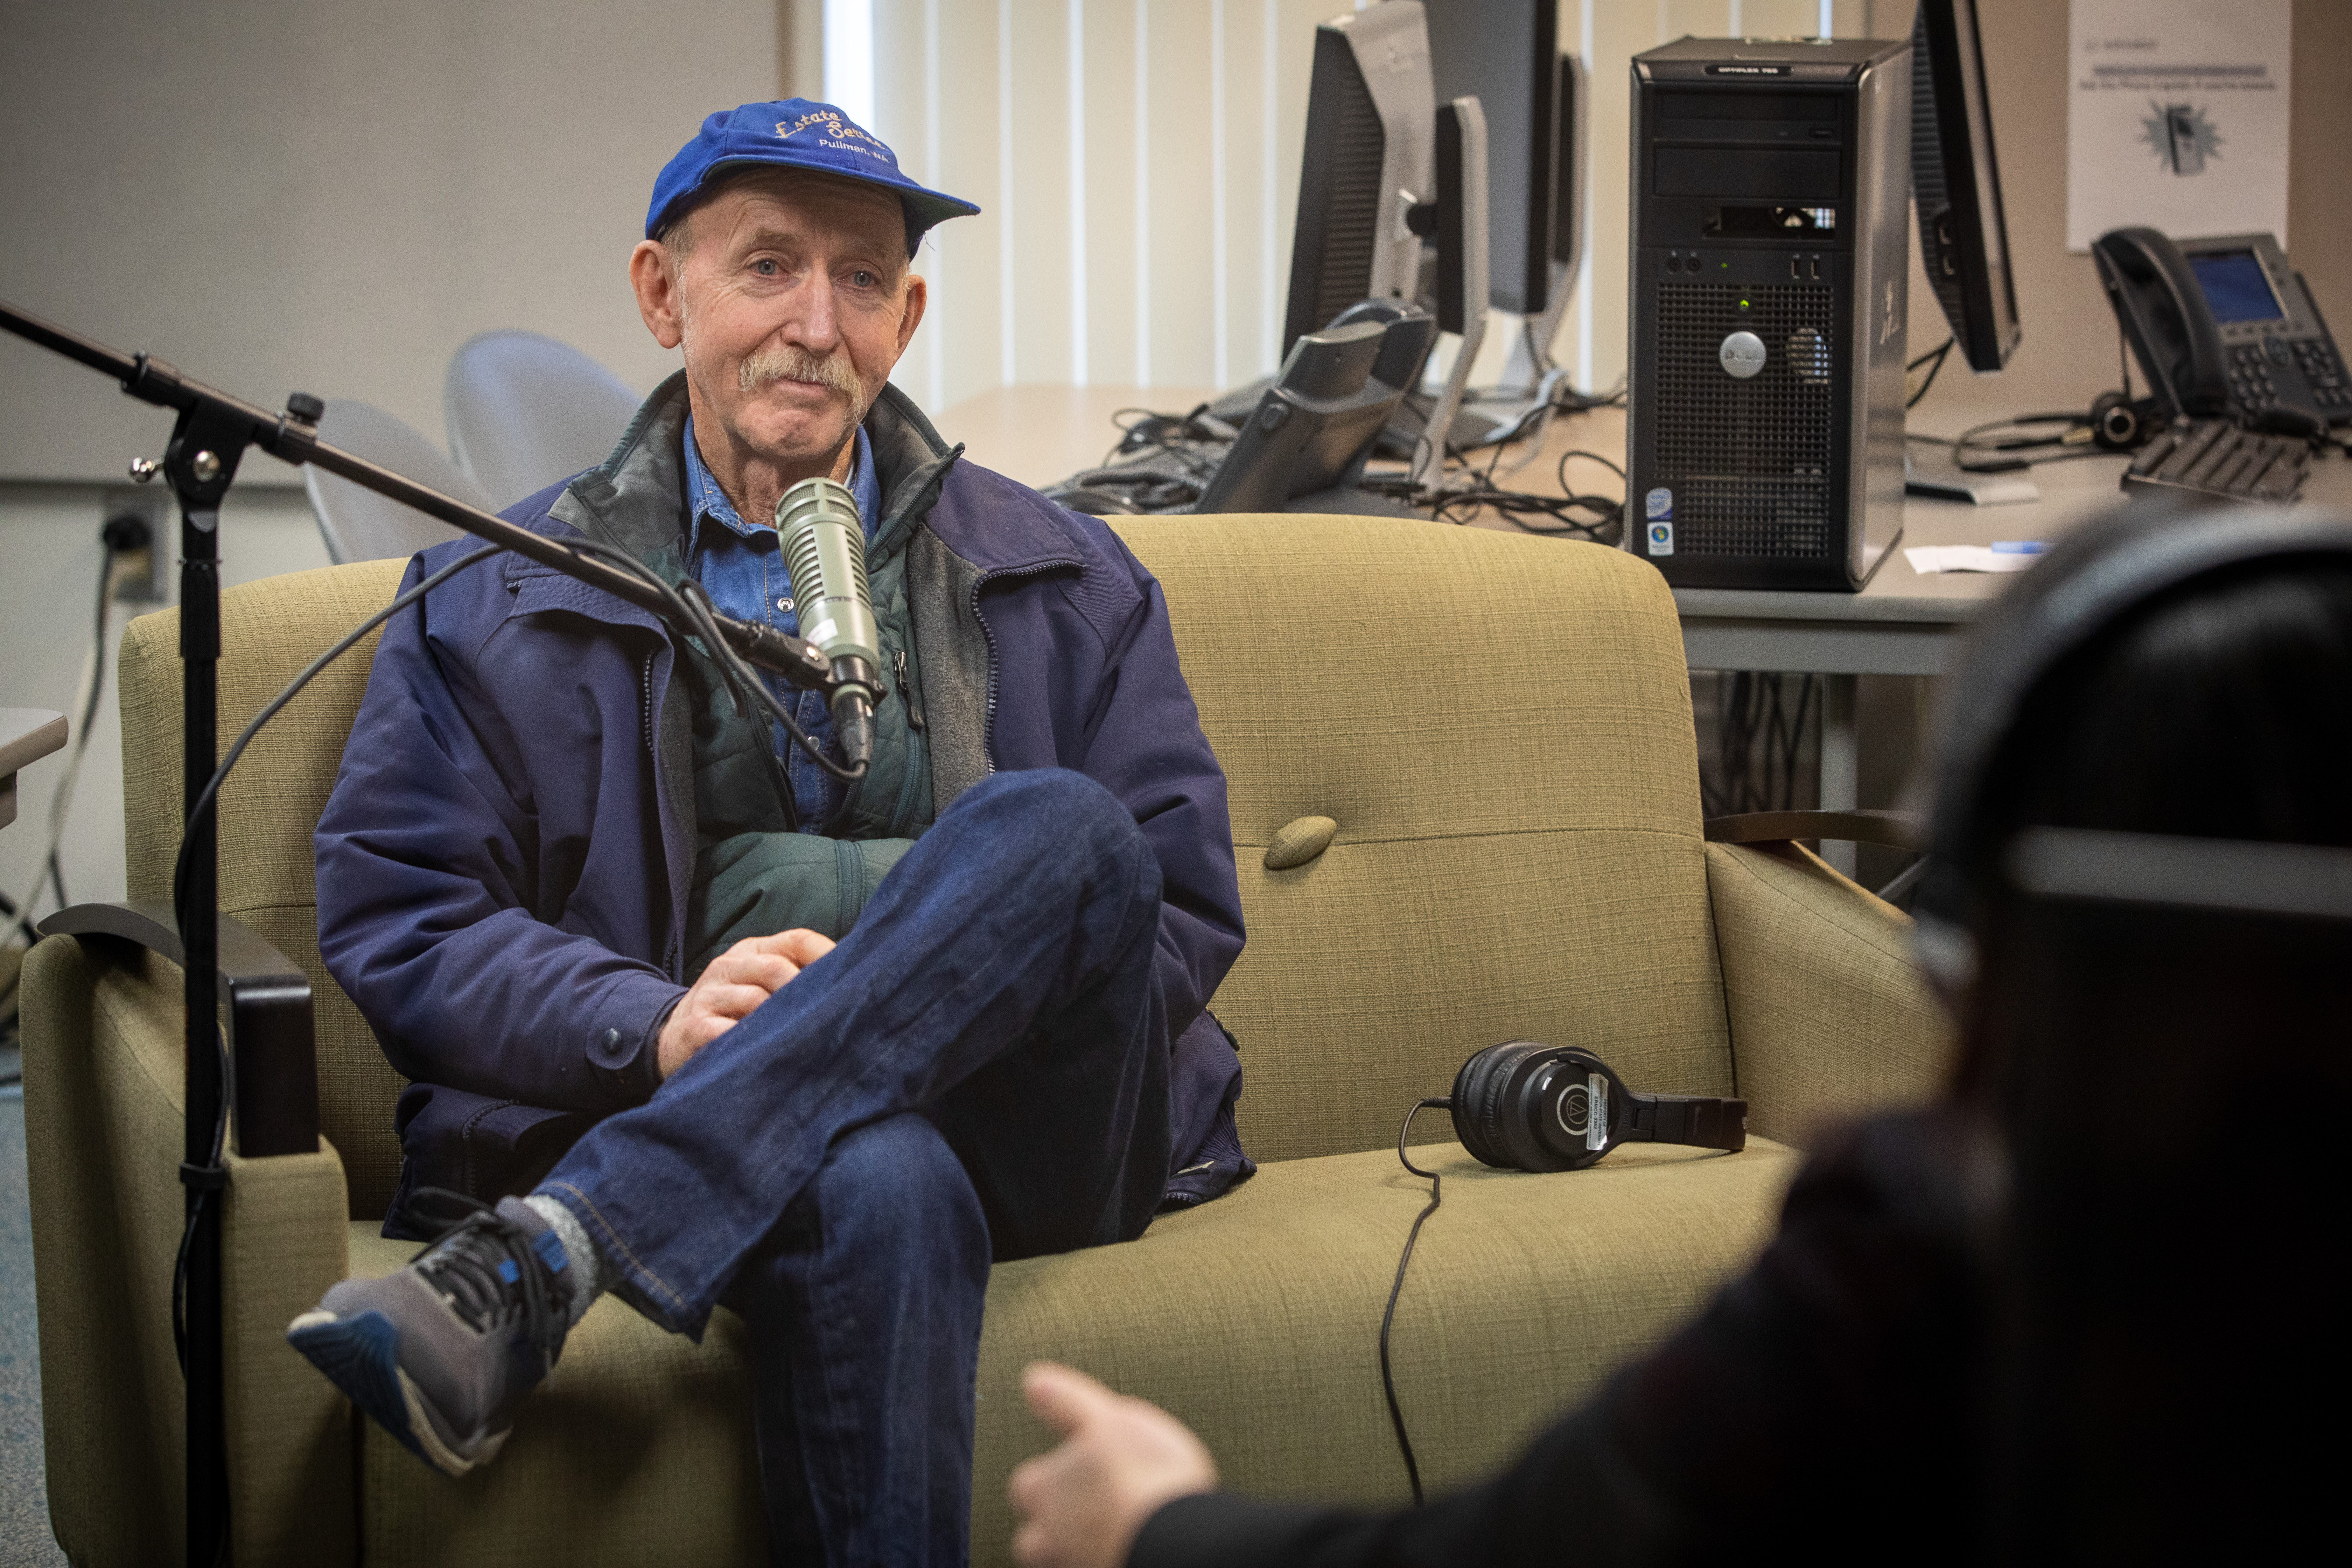 Podcast Guest Rich Old sits on a couch in front of a microphone.